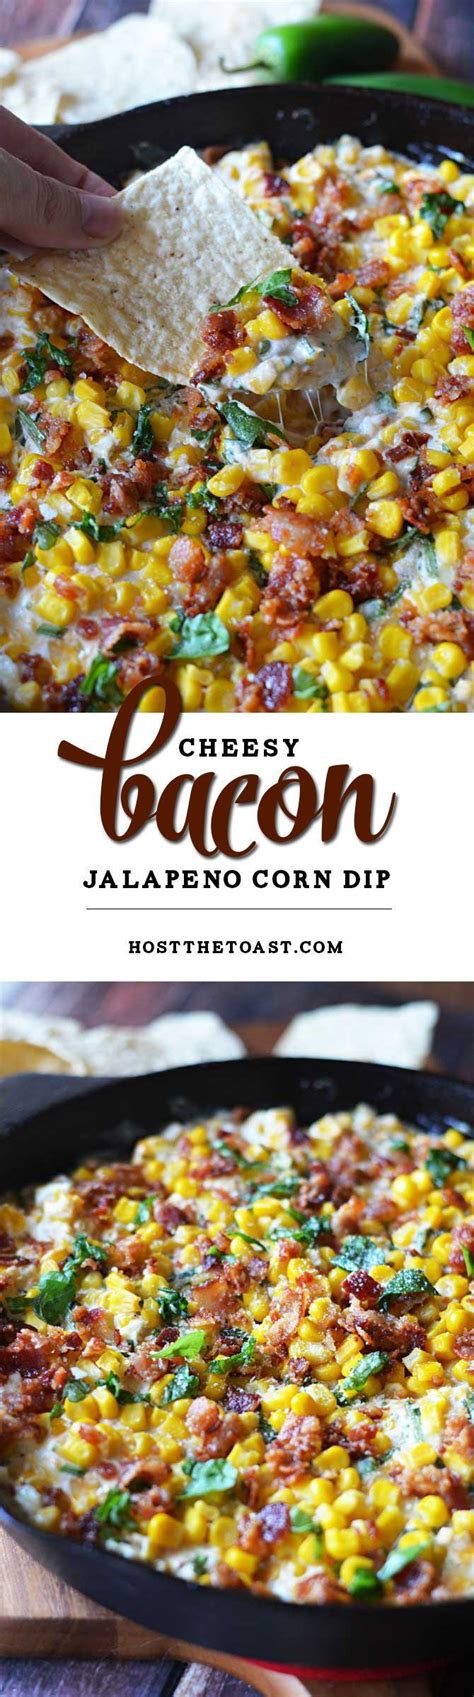 Cheesy Bacon Jalapeno Corn Dip It Was Delicious But Next Time I